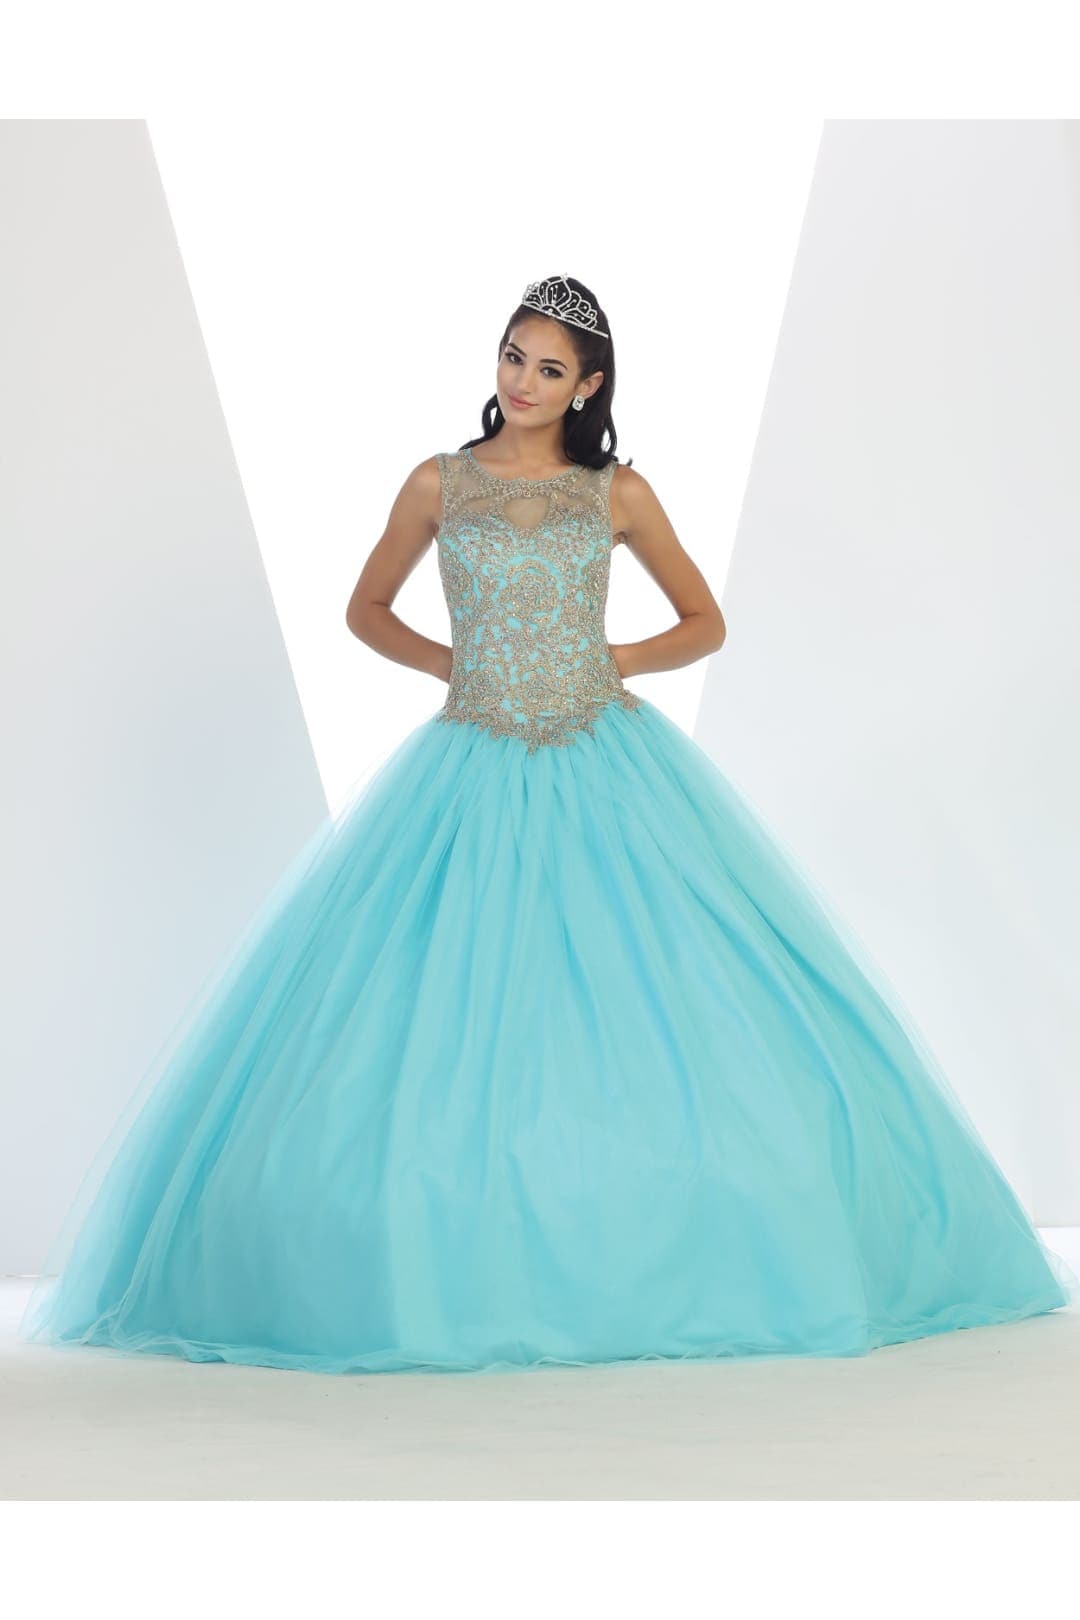 Military Ball Dresses | Marine Corps Gowns – ABC Fashion